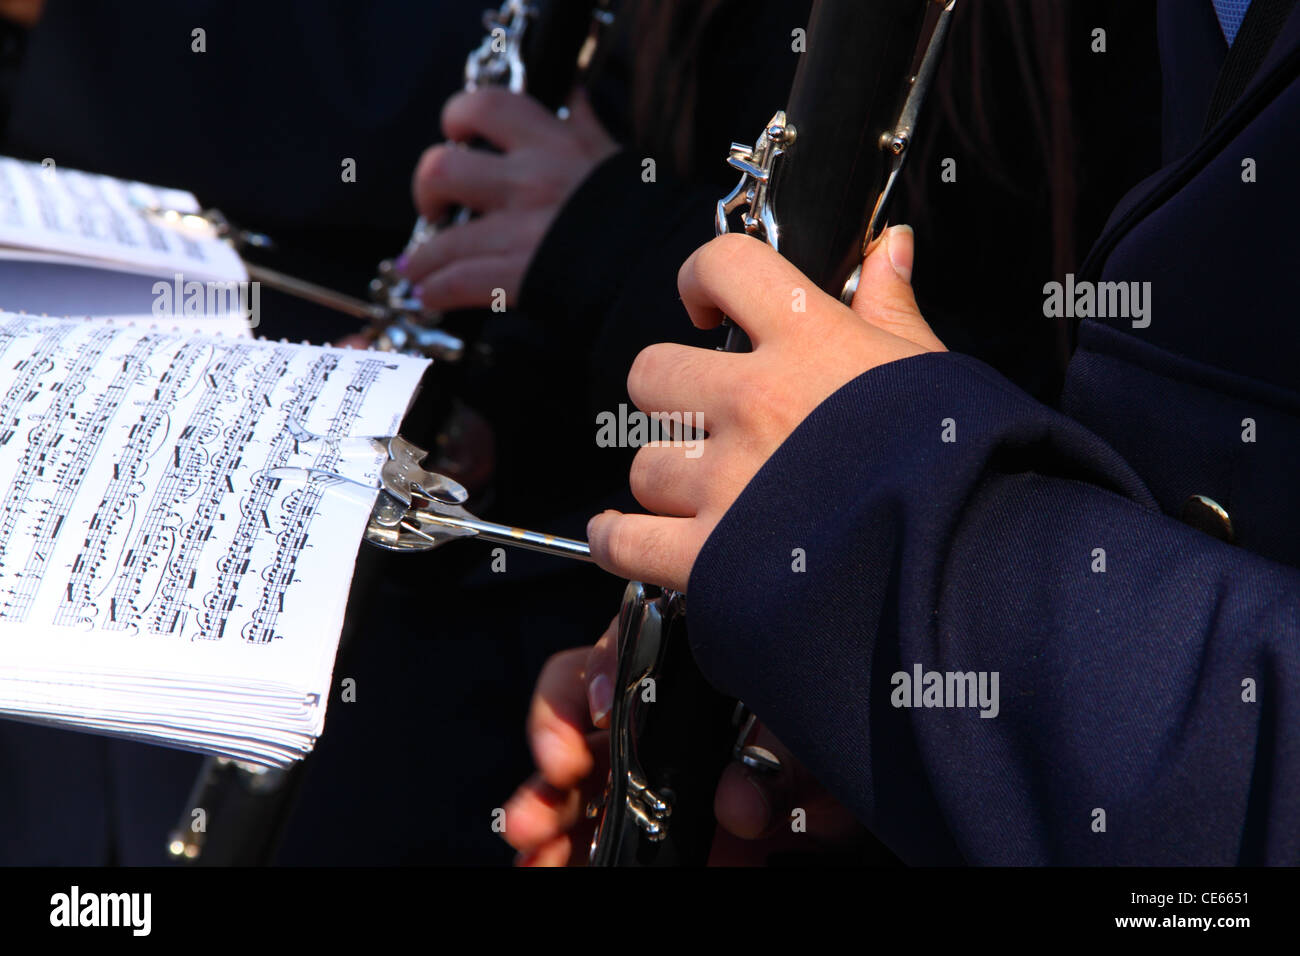 A musician is playing a clarinet following a musical score Stock Photo